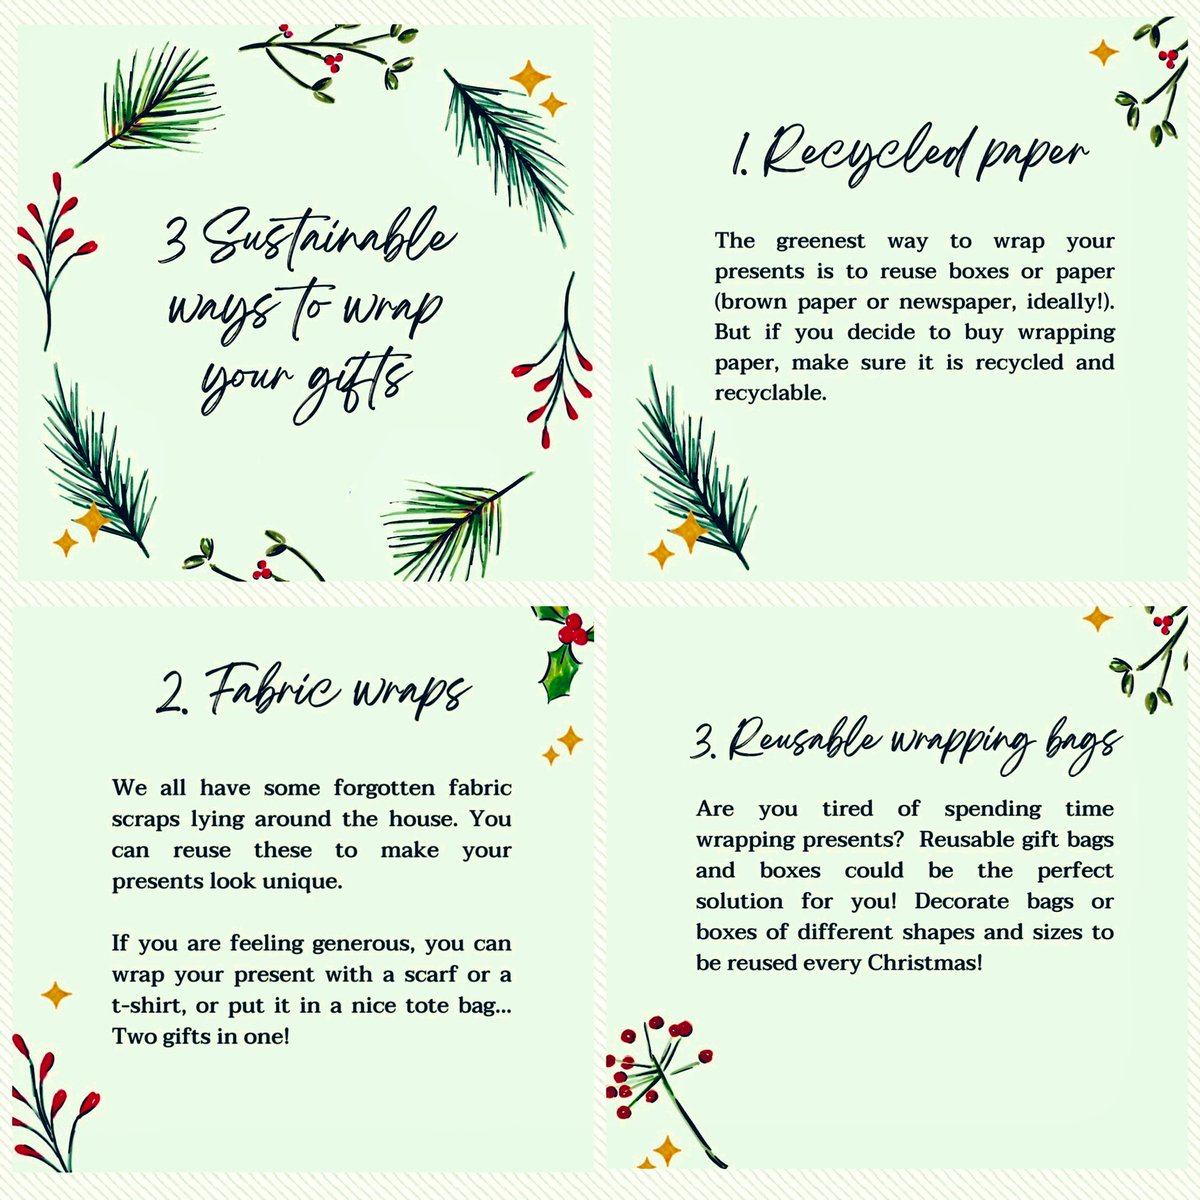 Have you ever wondered what sustainable alternatives exist for wrapping your Christmas presents? Here are 3 simple ways to be kinder to the environment this holiday season! 🎁🎅🏼🎄
#SustainableWrapping #EcoAlternatives
#PlasticFree #GreenChristmas